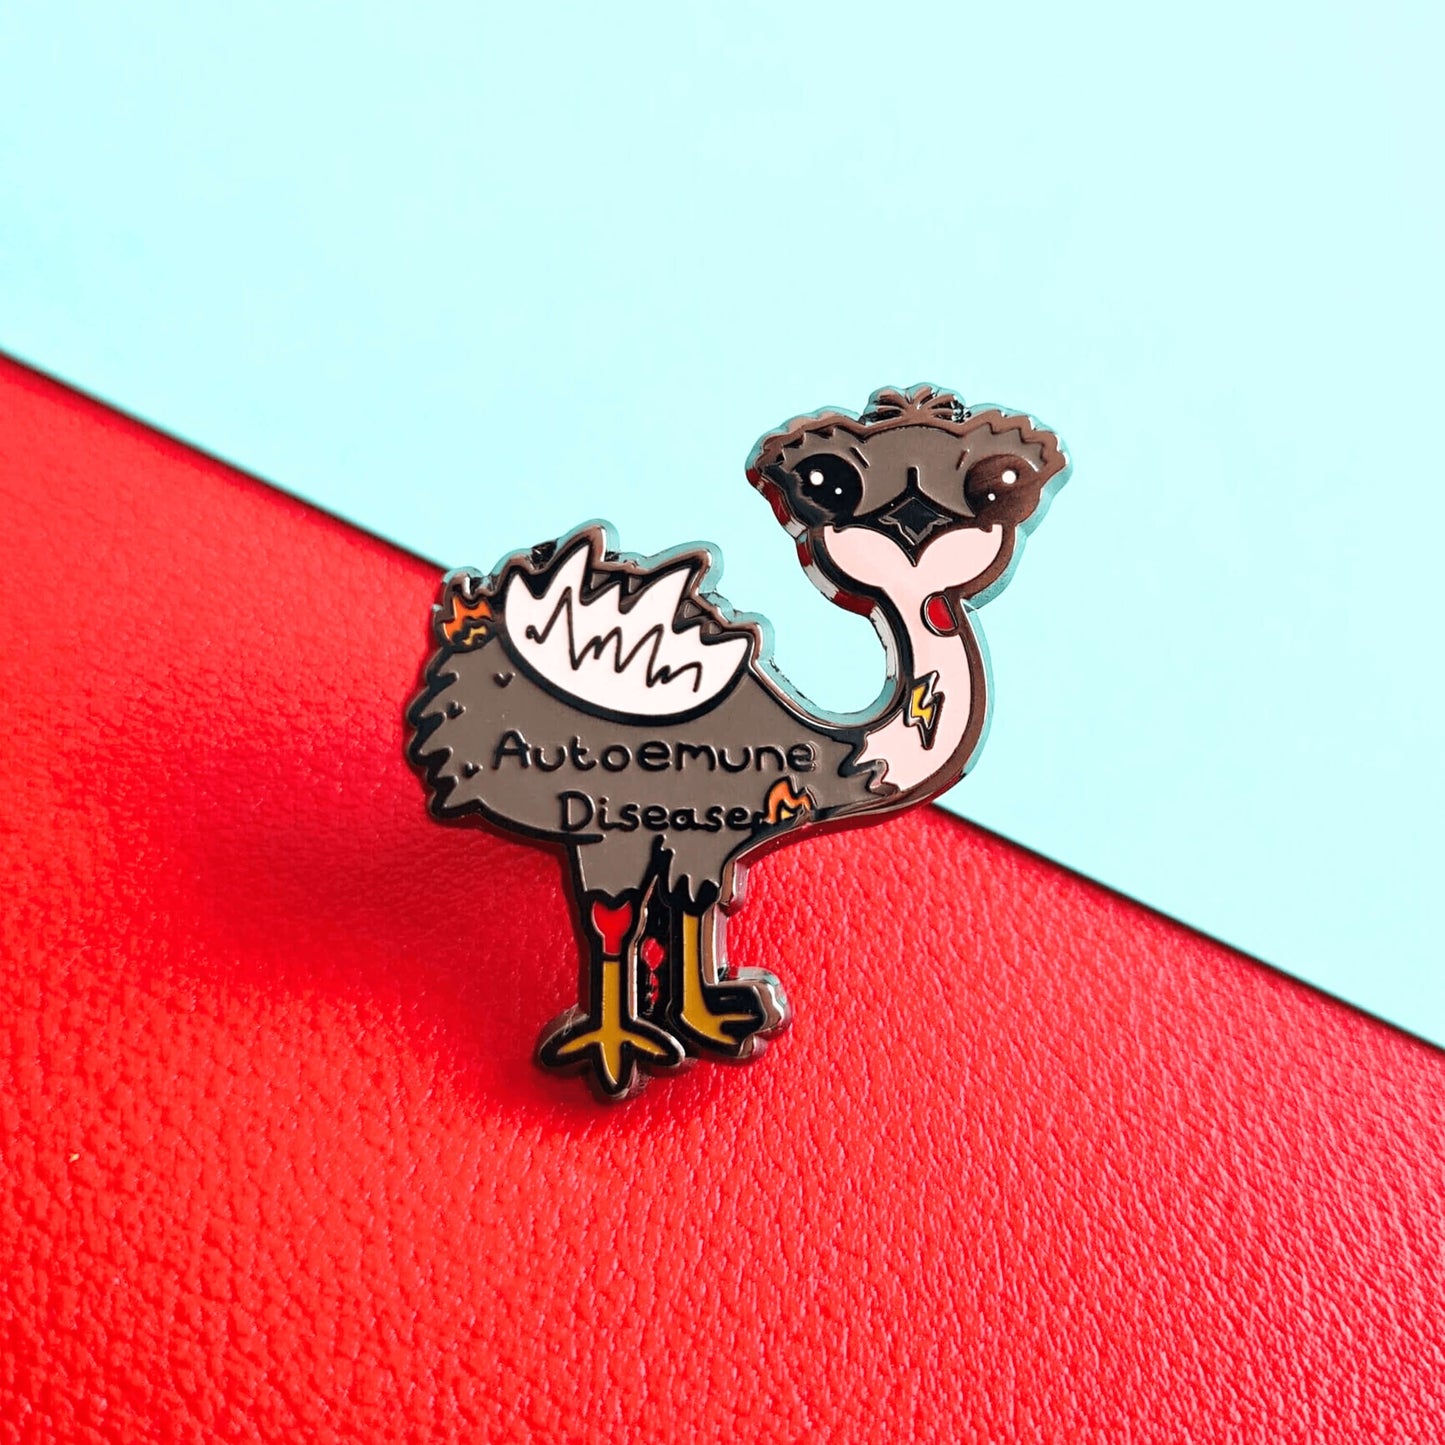 Autoemune Enamel Pin - Autoimmune Disease shown on a red and blue background. The pin is a grey and white emu bird with various problems highlighted with lightning bolts, flames and red circles with the words autoemune disease written across its belly. Design created to raise awareness for autoimmune diseases.